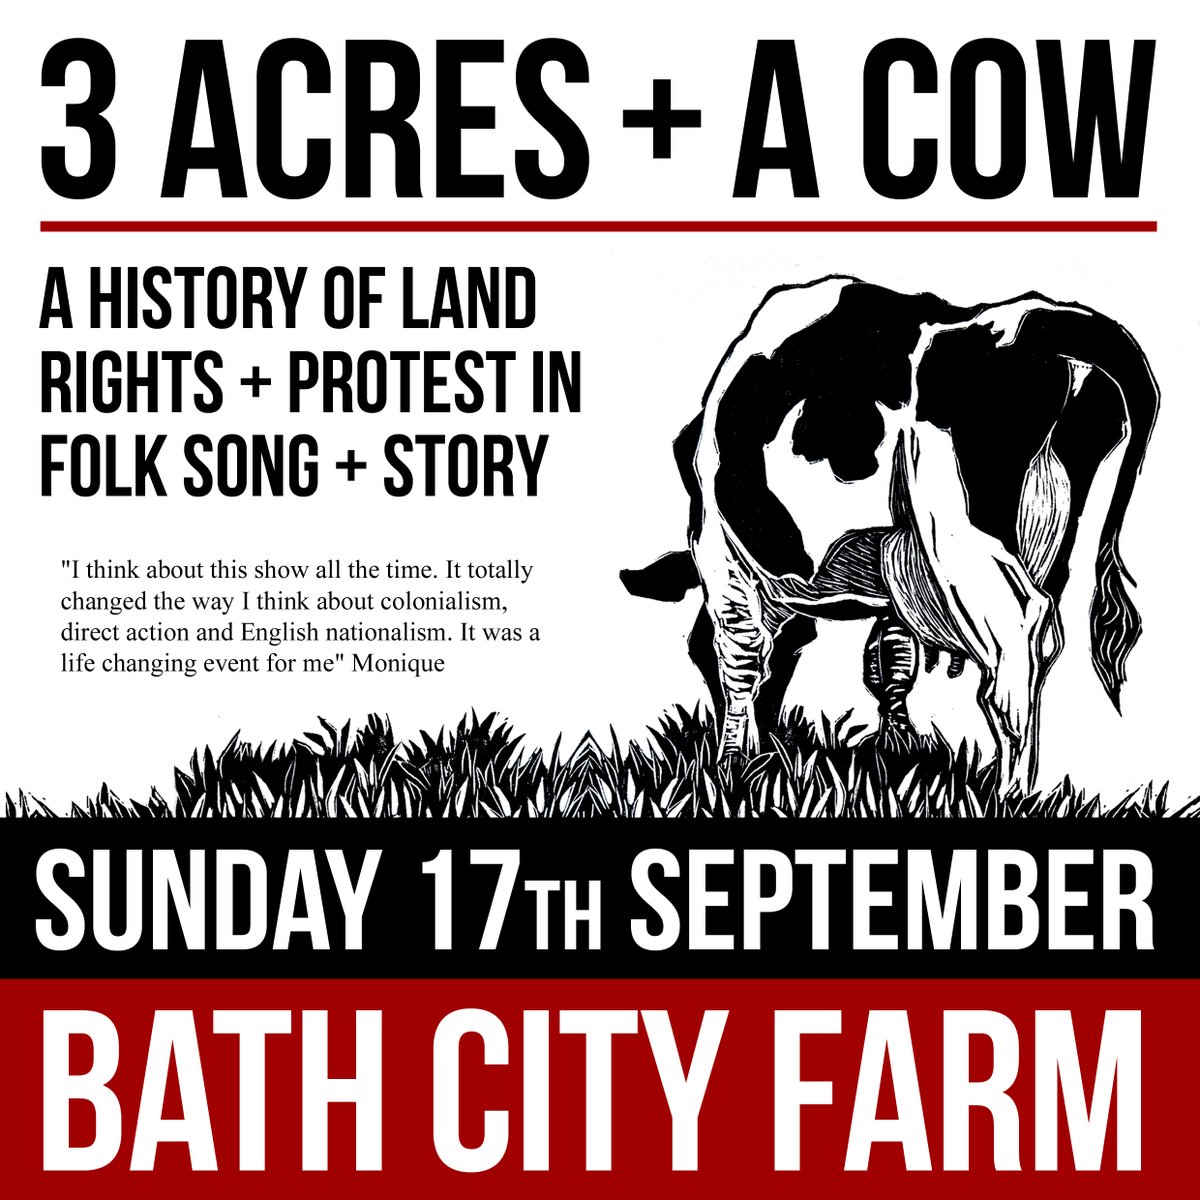 We are performing at @BathCityFarm on the afternoon of Sunday 17th September - tickets from tickettailor.com/events/threeac… Come and sing through a 1000 years of land rights history with us! (This is an outdoor show but we have a local hall hired as a wet weather contingency plan)